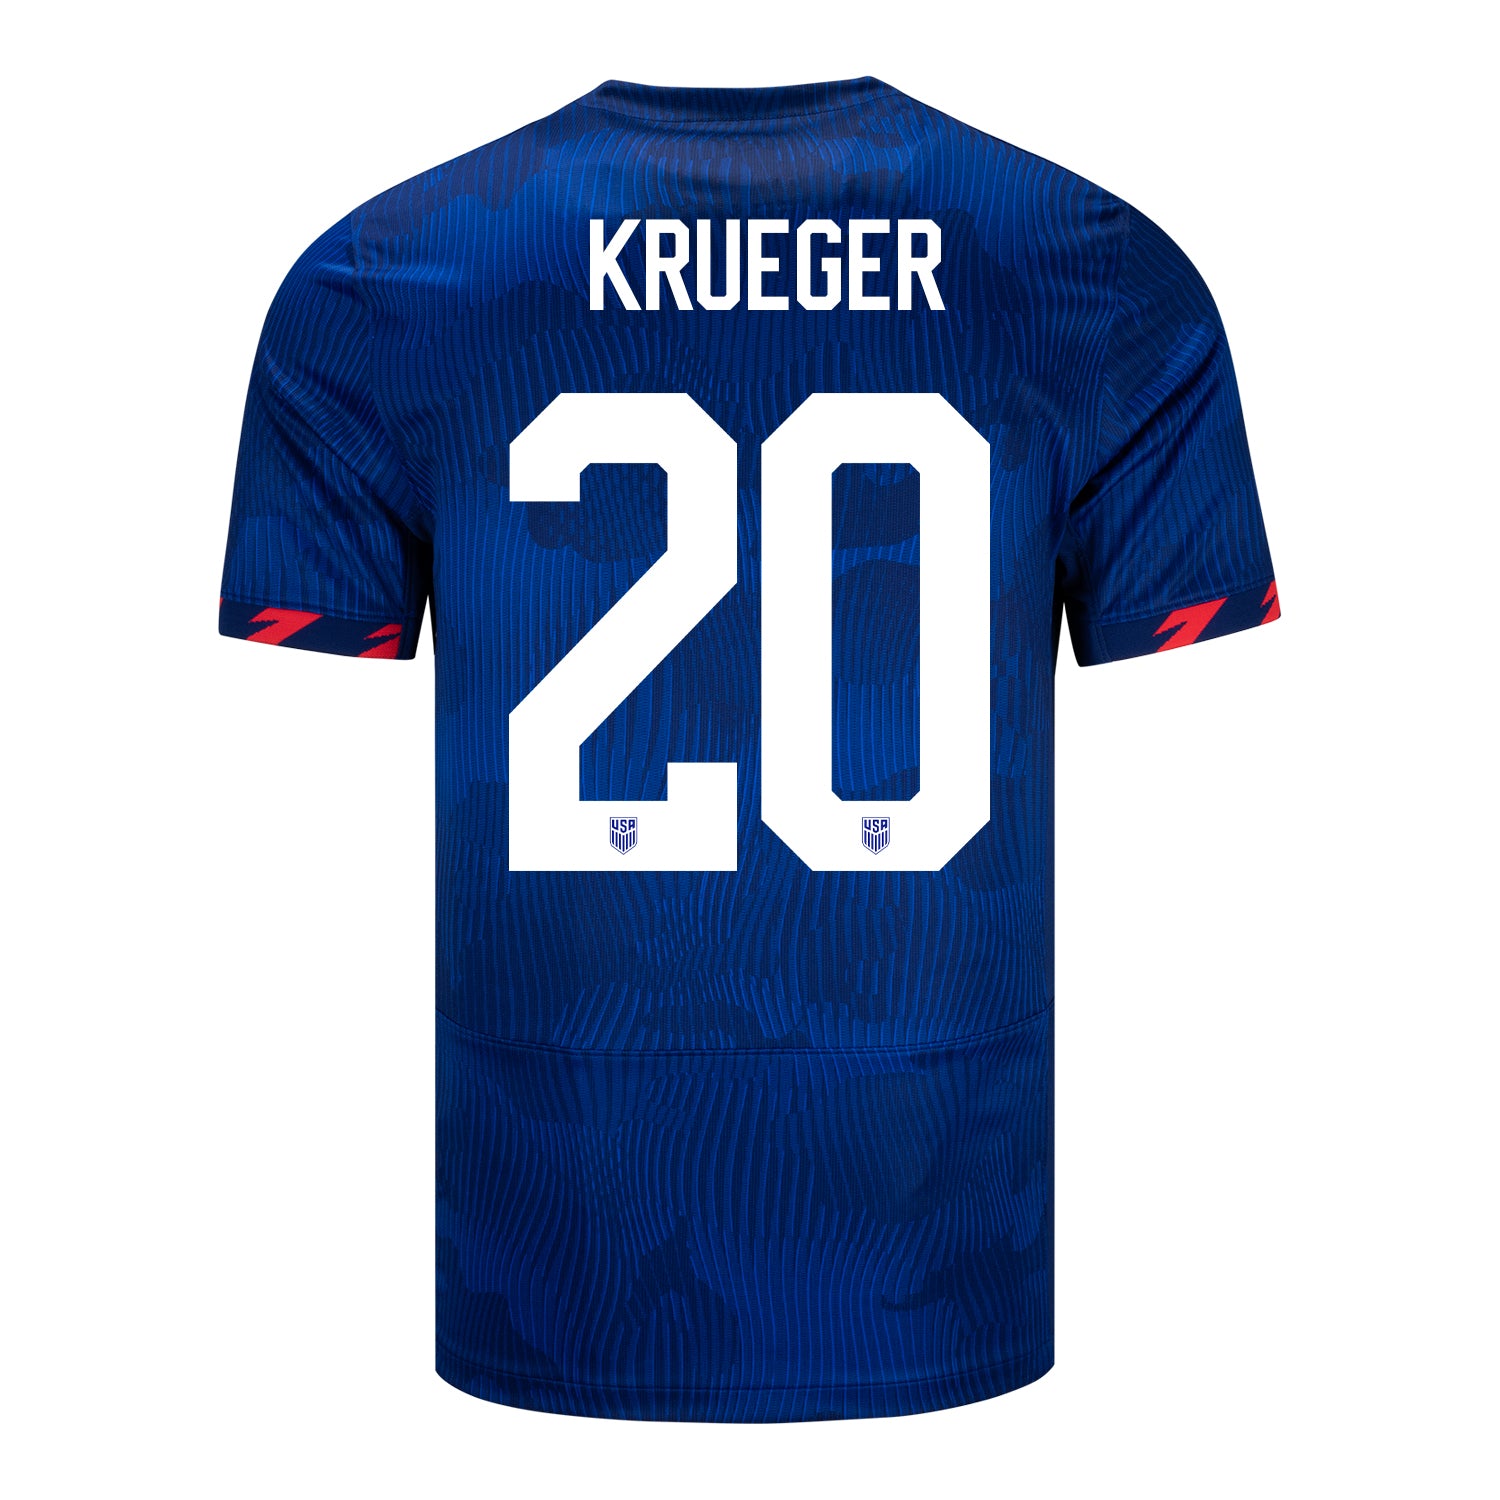 Men's Personalized Nike USWNT Away Stadium Jersey in Blue - Back View